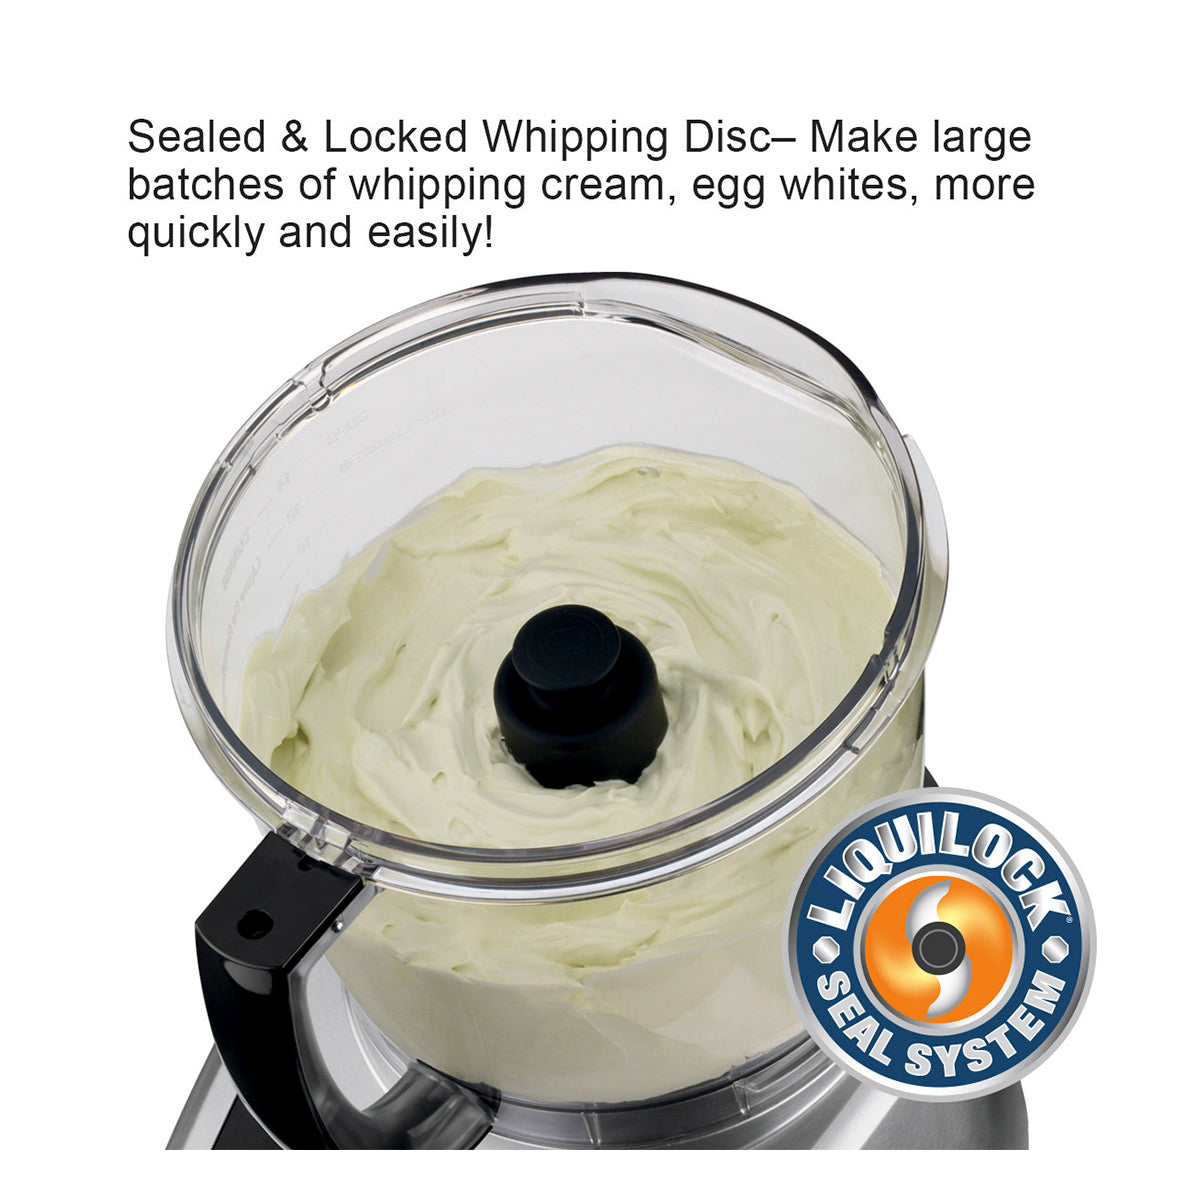 WFP16S - 4-Qt. Bowl Cutter Mixer with LiquiLock Seal System by Waring Commercial